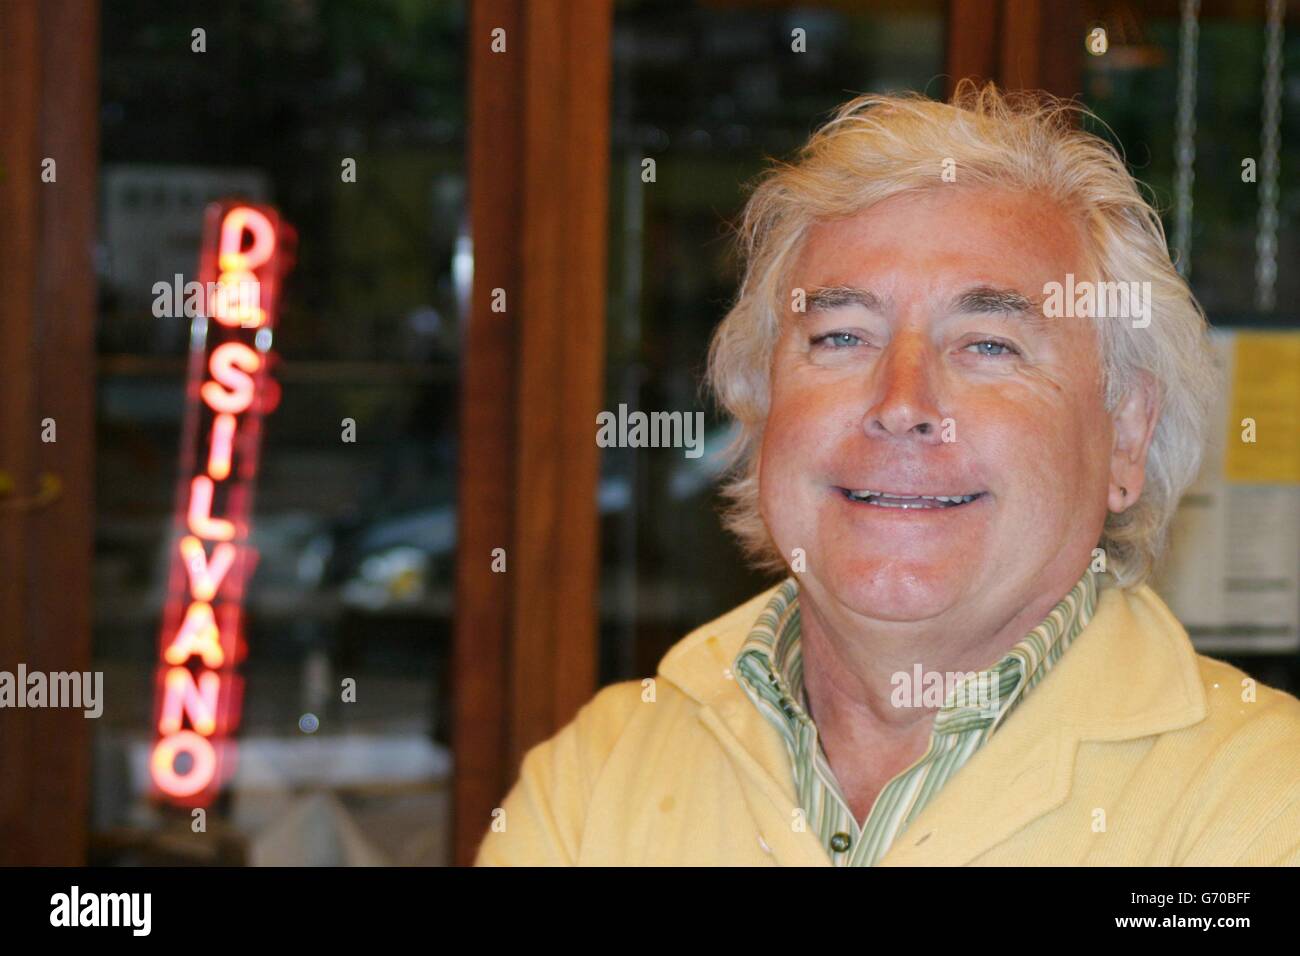 Silvano Marchetto, owner of Da Silvano restaurant in New York, where Princess Michael of Kent denied making a racist comment to a group of diners. Her spokesman said the claim, reported on the front page of today's New York Post, was 'simply untrue'. The Princess, whose husband is a first cousin of the Queen, clashed with a boisterous group of diners at an adjacent table in the restaurant. Stock Photo